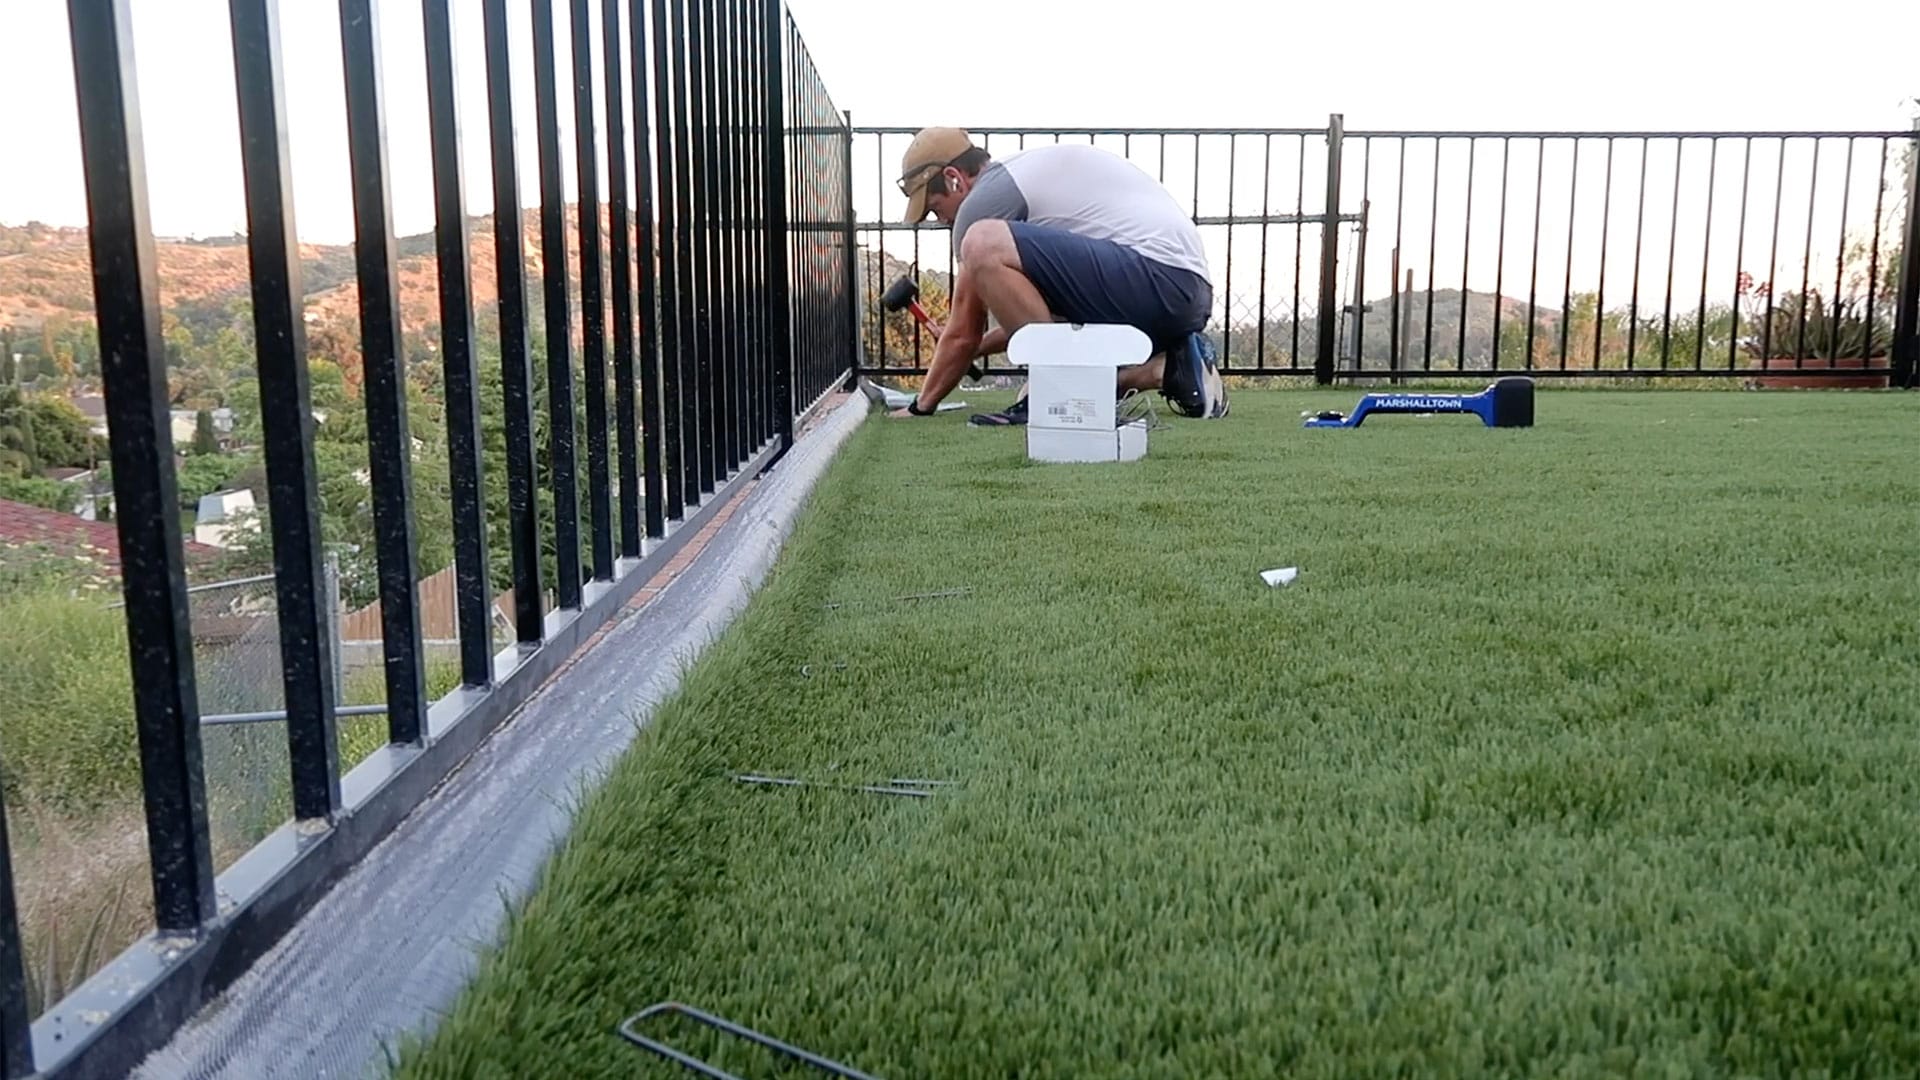 How to Build an Artificial Turf Field?